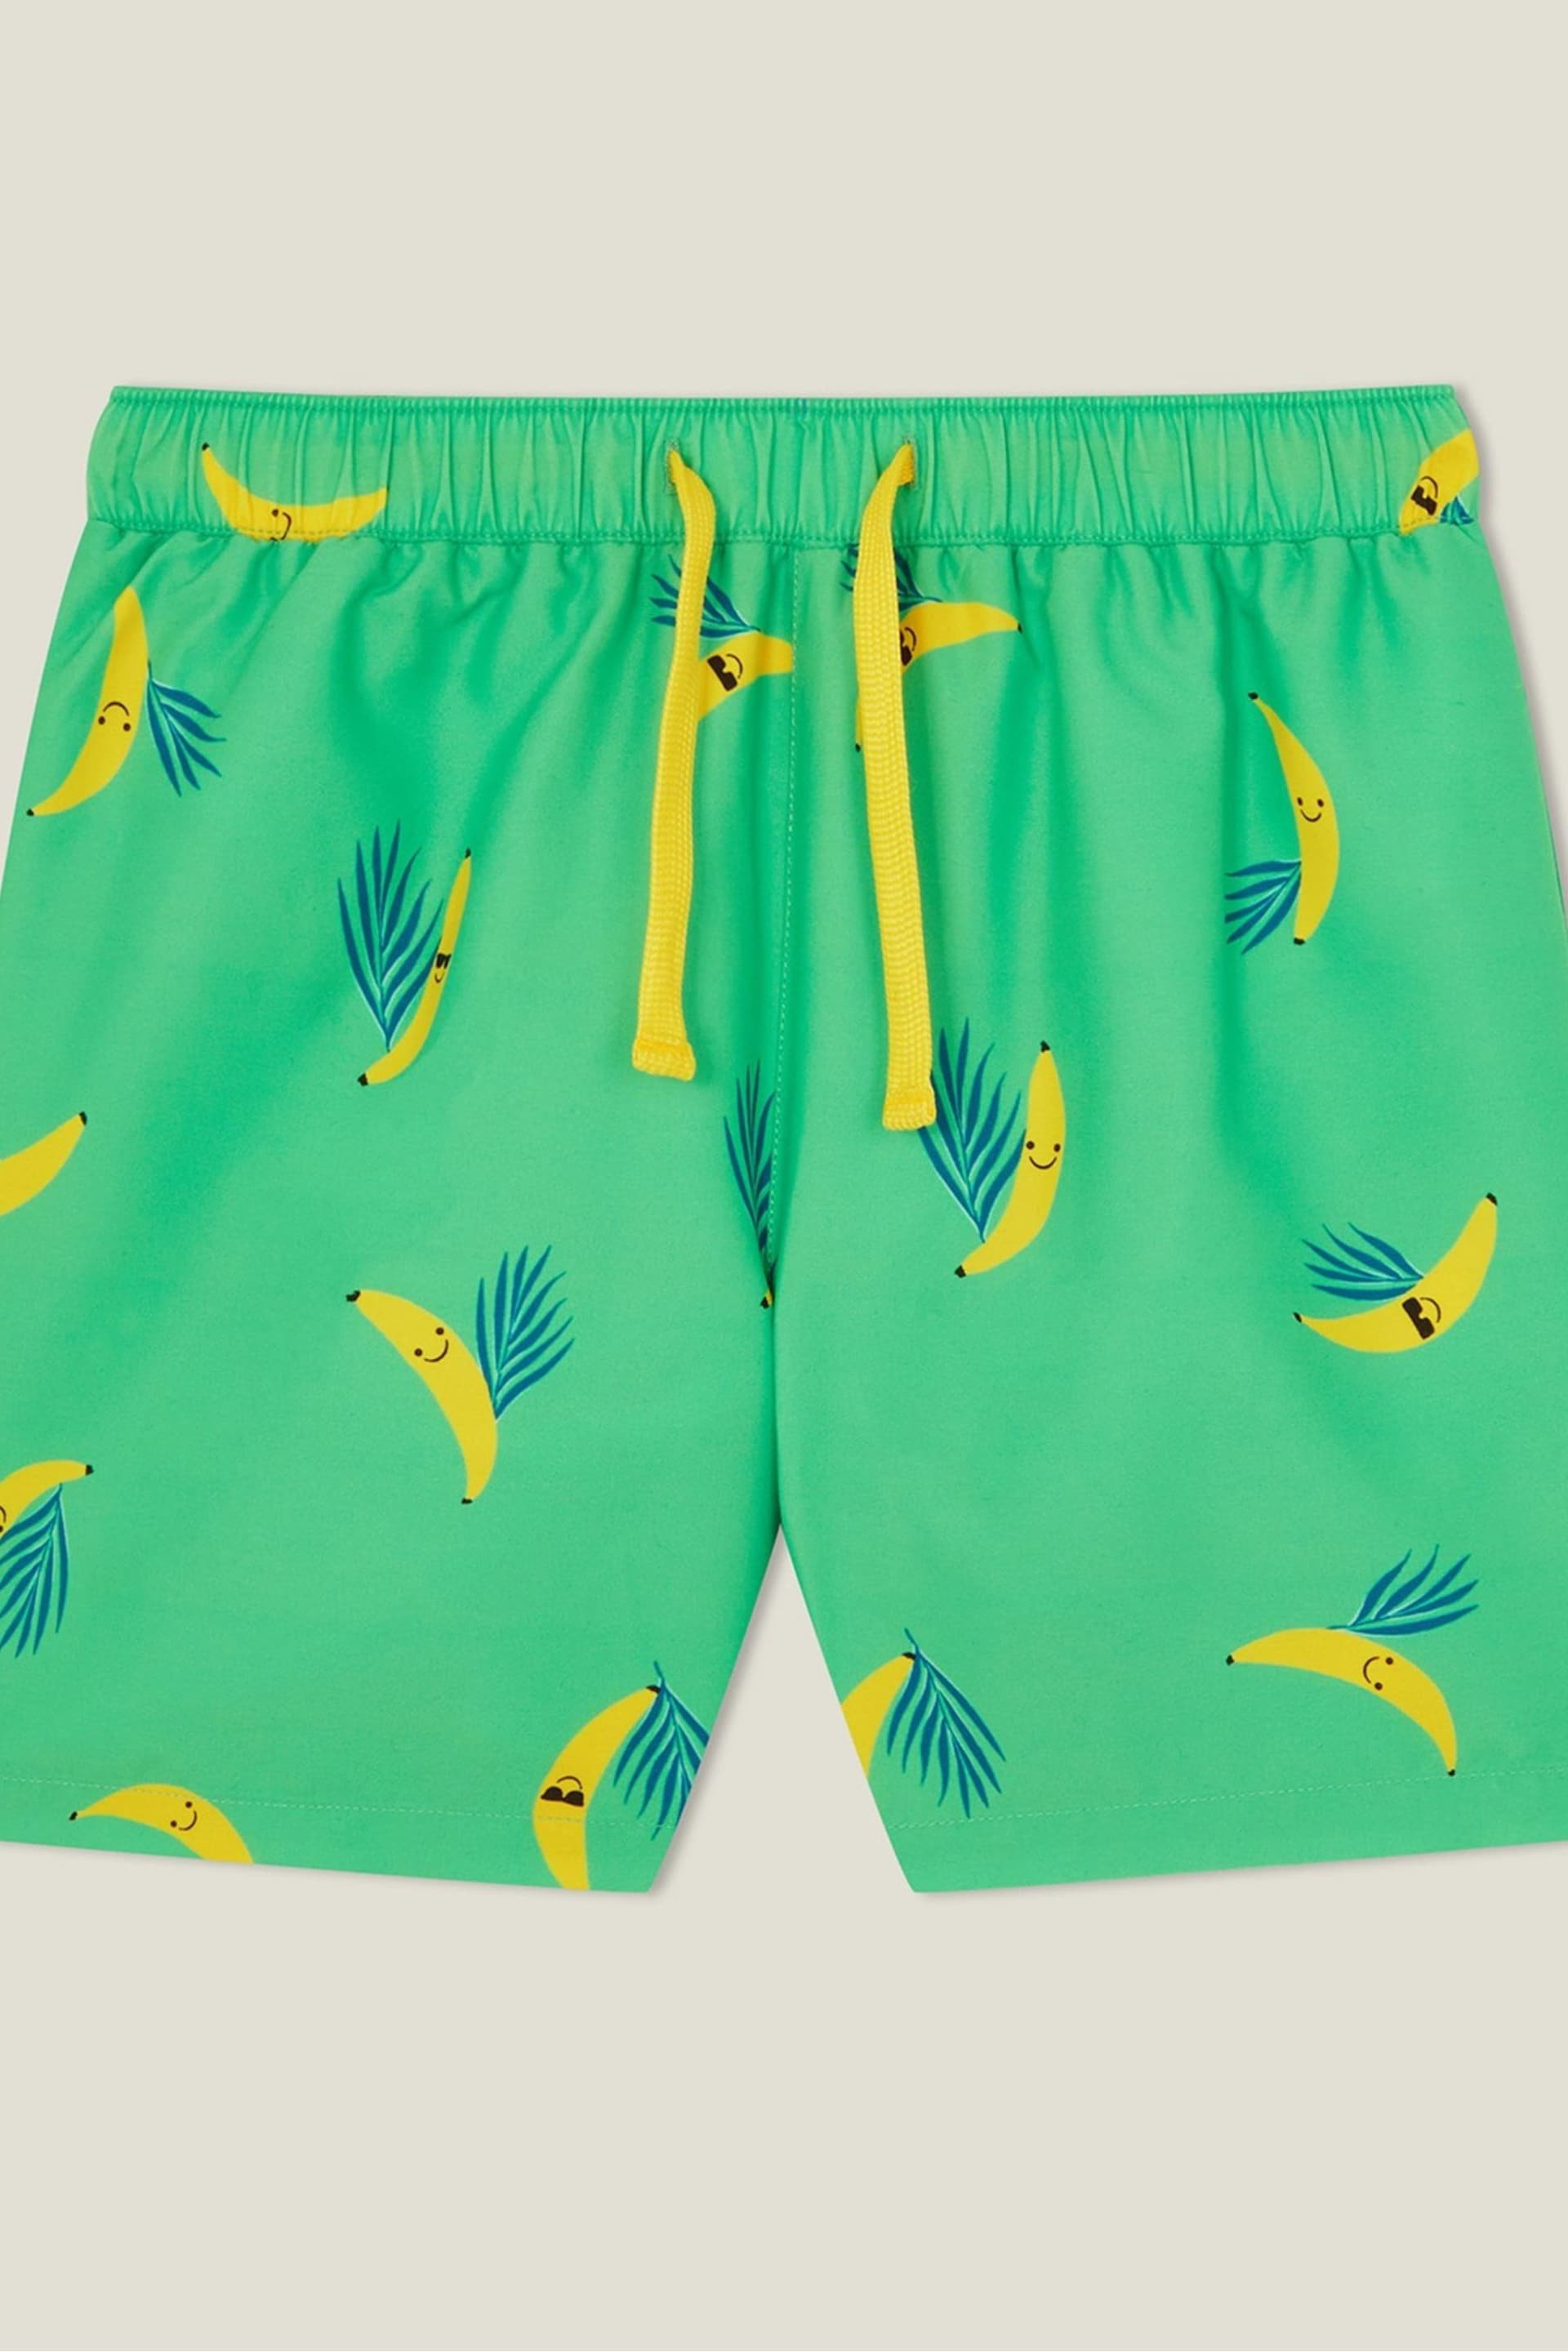 Angels By Accessorize Green Banana Swim Shorts - Image 1 of 2